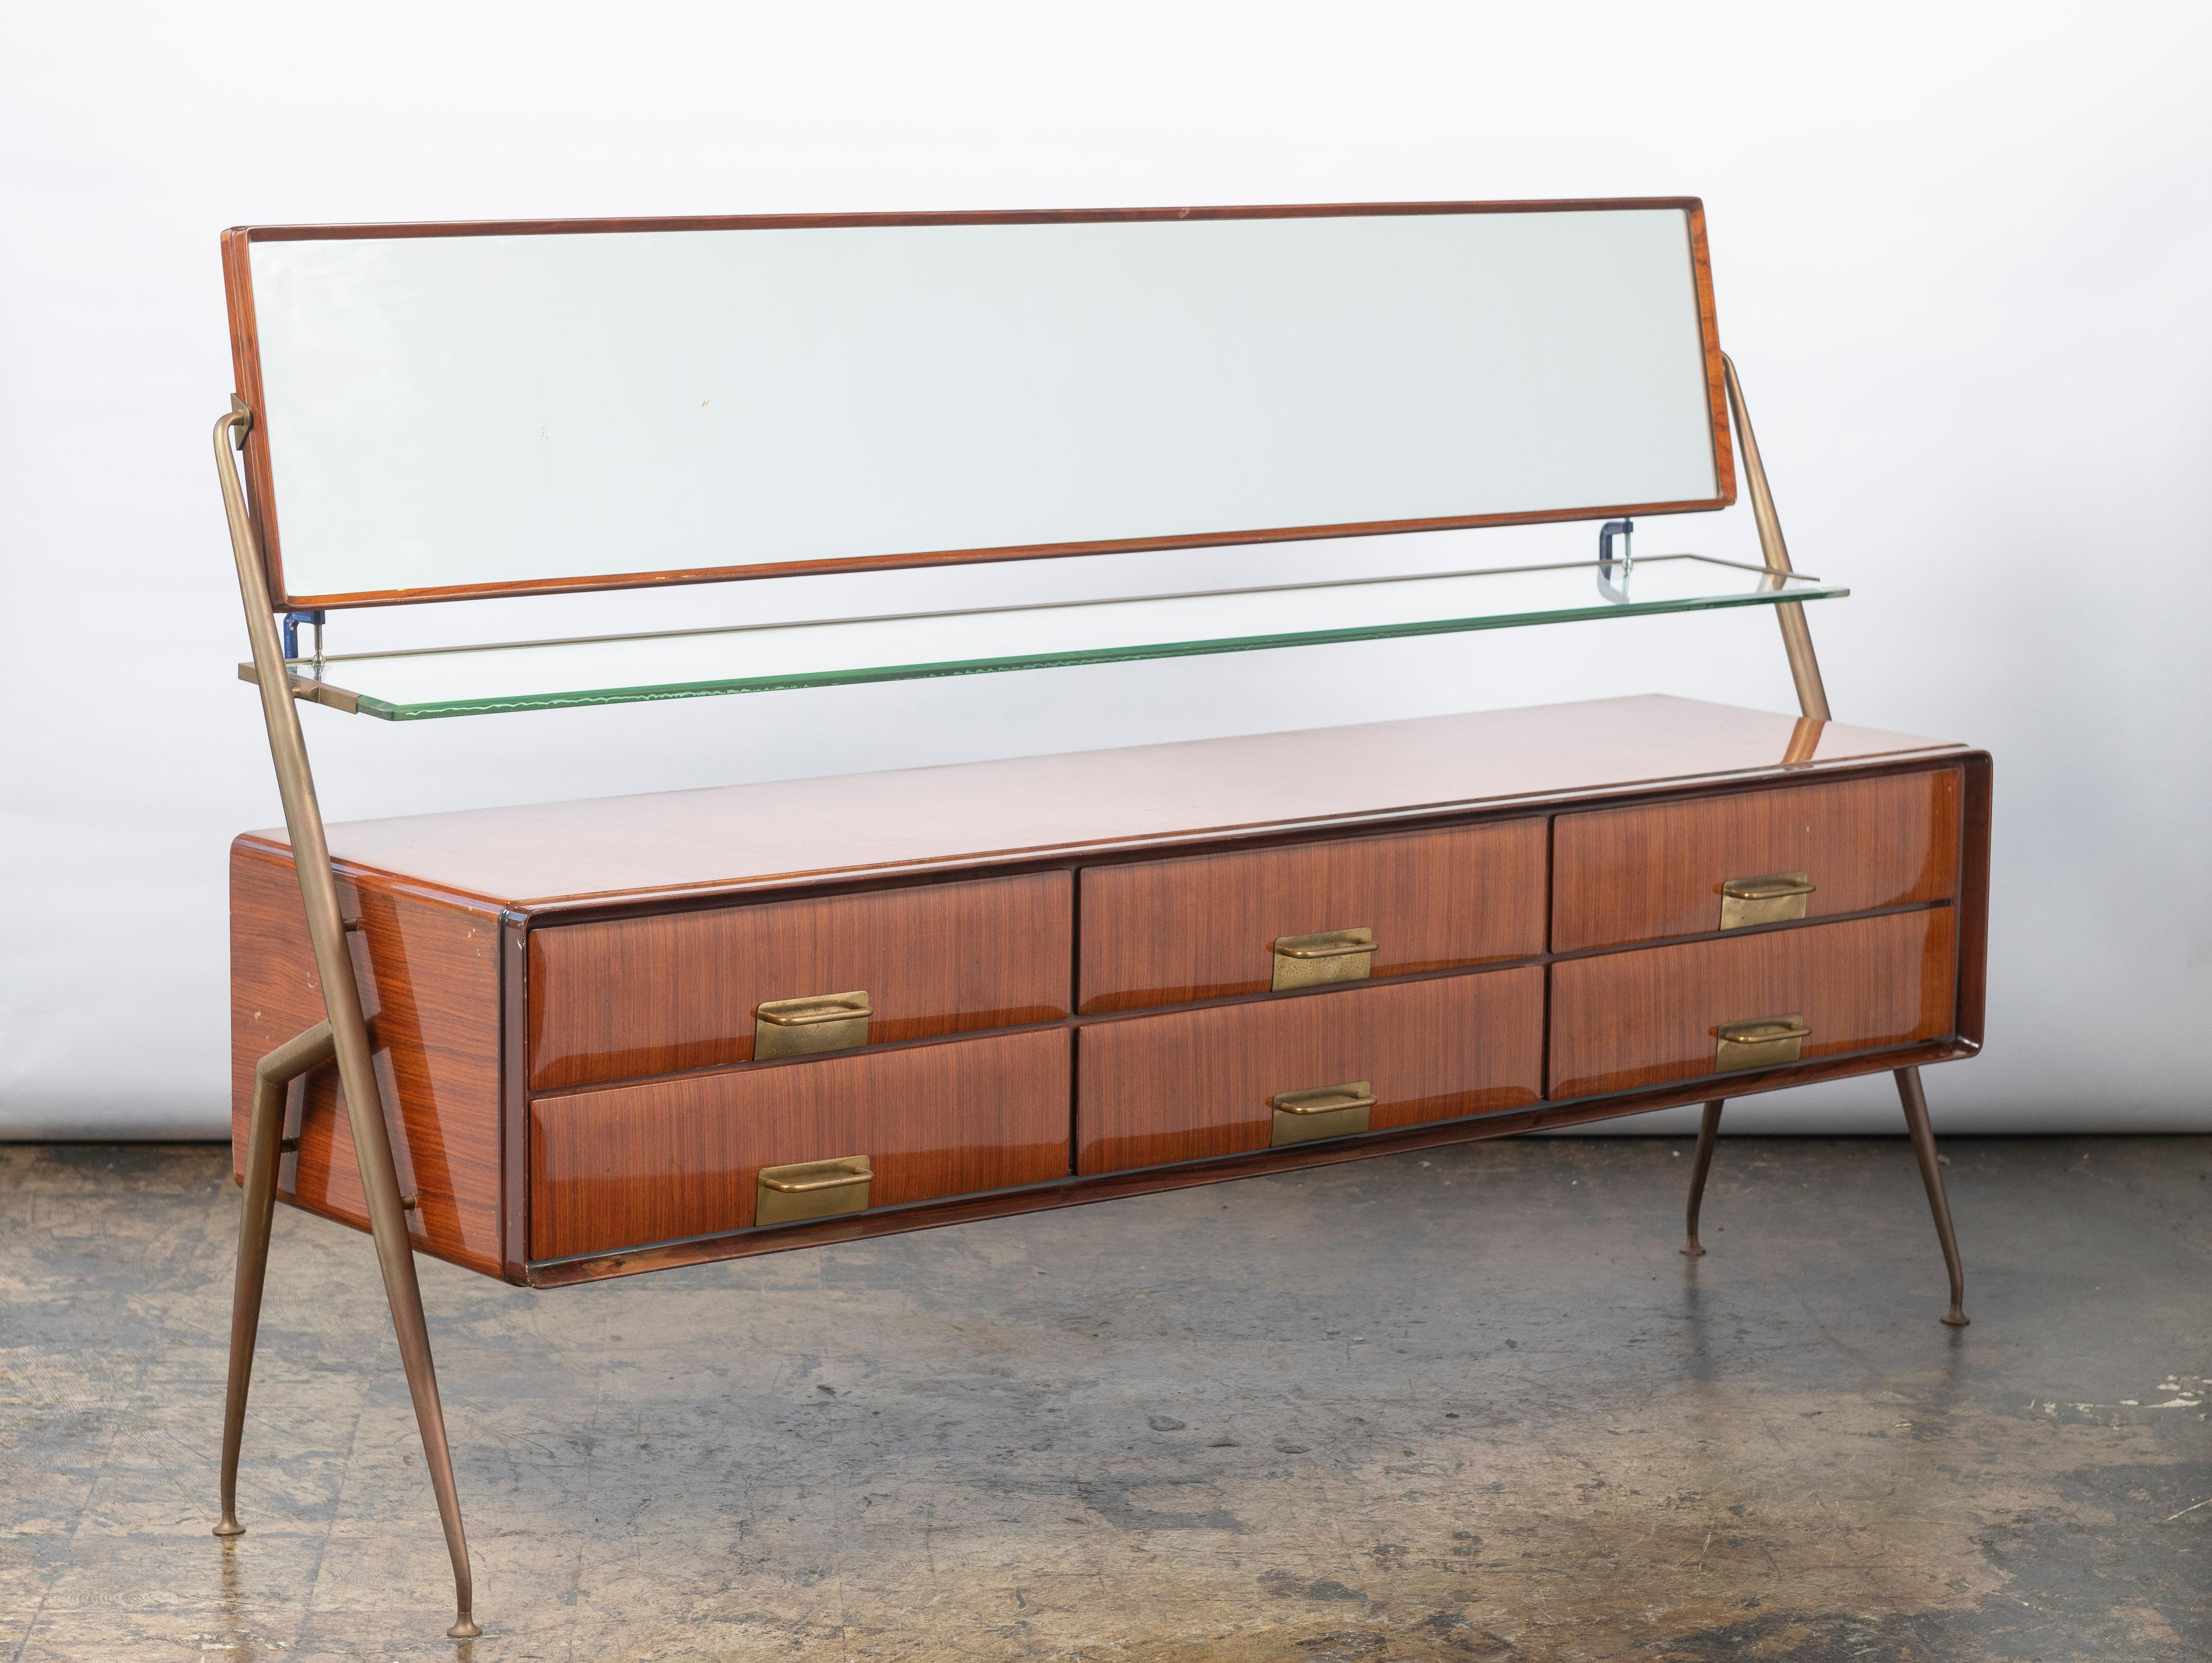 Stunning, sleek and modern, this dresser/credenza, made of polished rosewood veneer and brass fittings, is in good condition. Designed by renowned Italian designer, Silvio Cavatorta, the cabinet includes with six drawers, a glass shelf and a large,